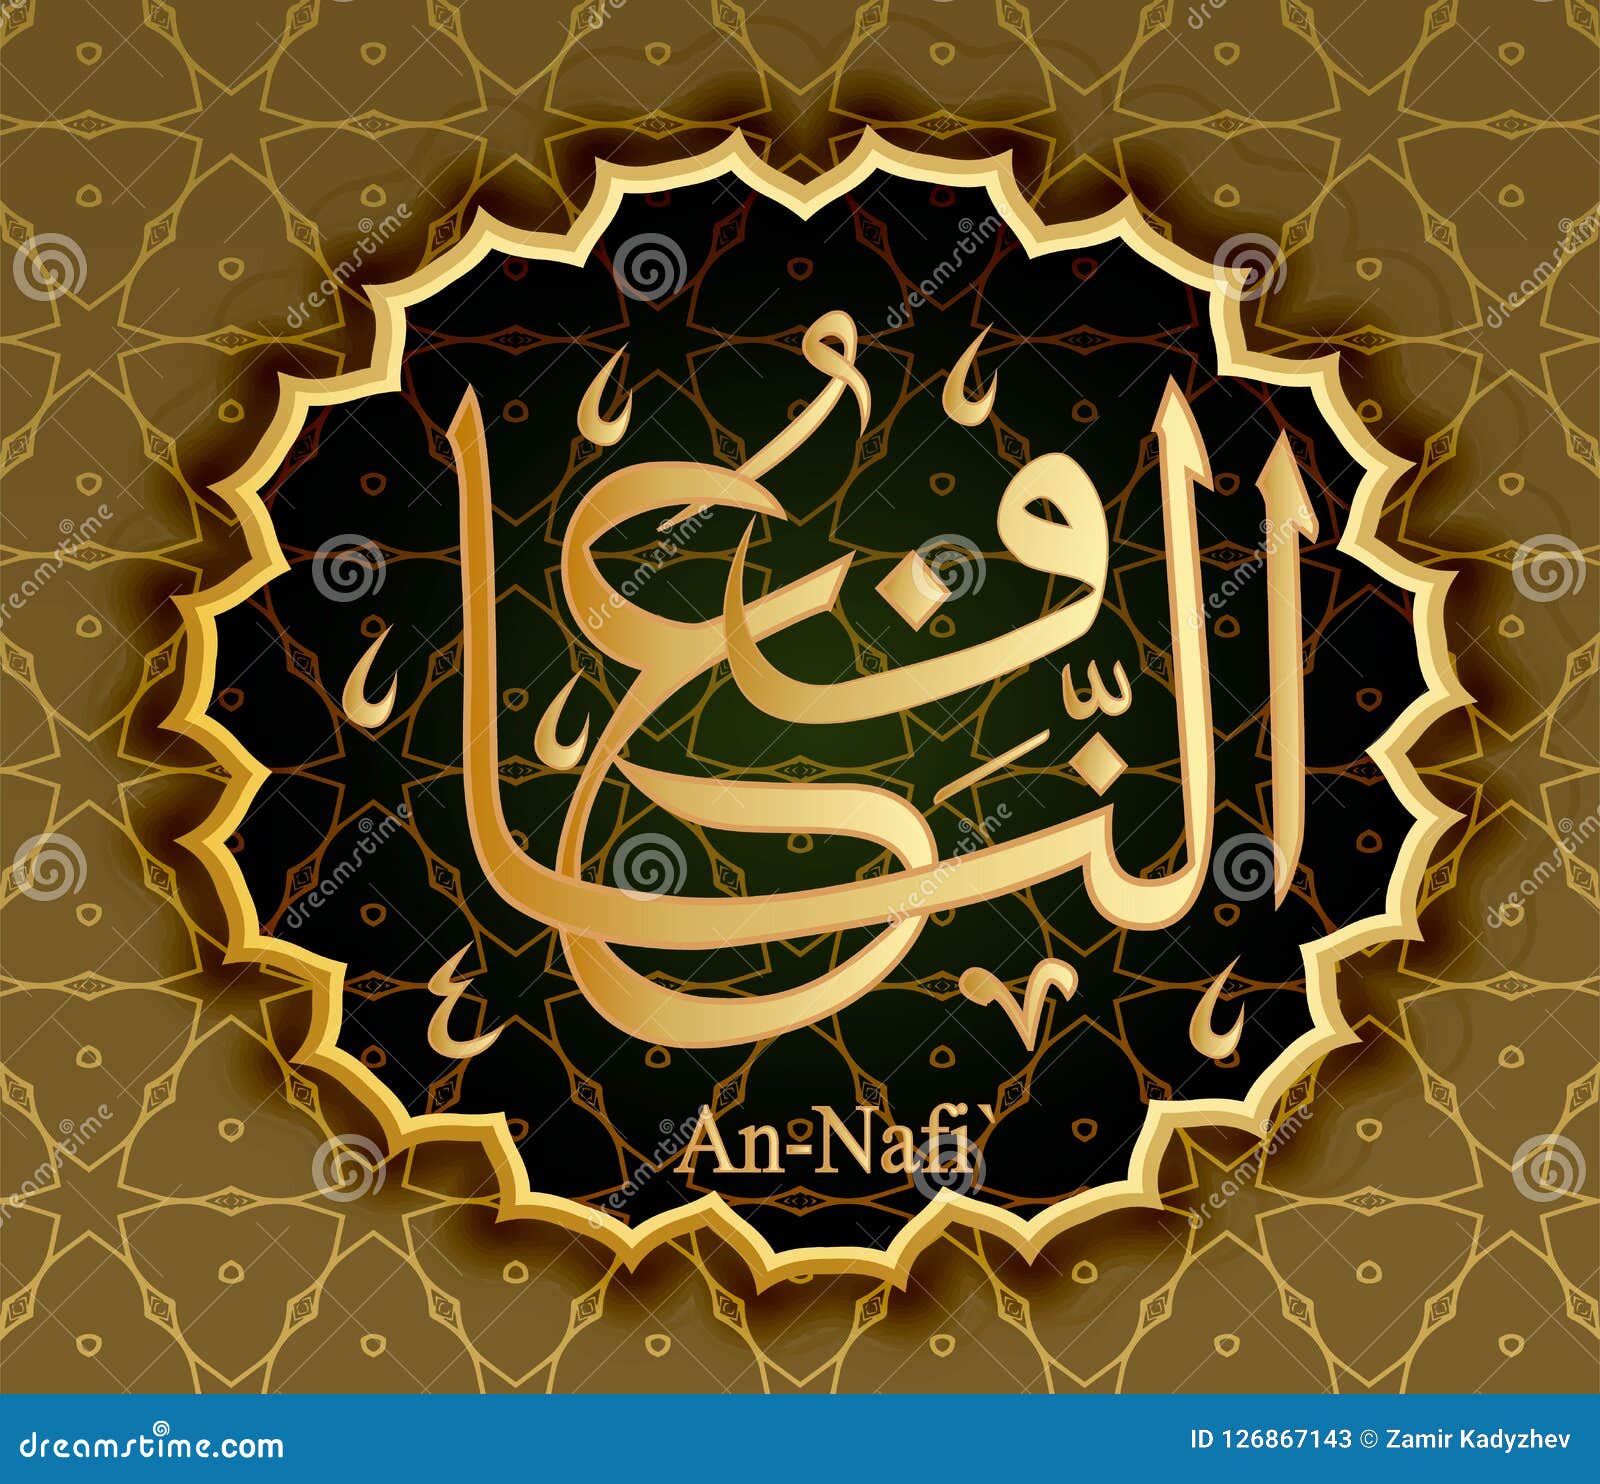 the name of allah an-nafi ` means benefactor.